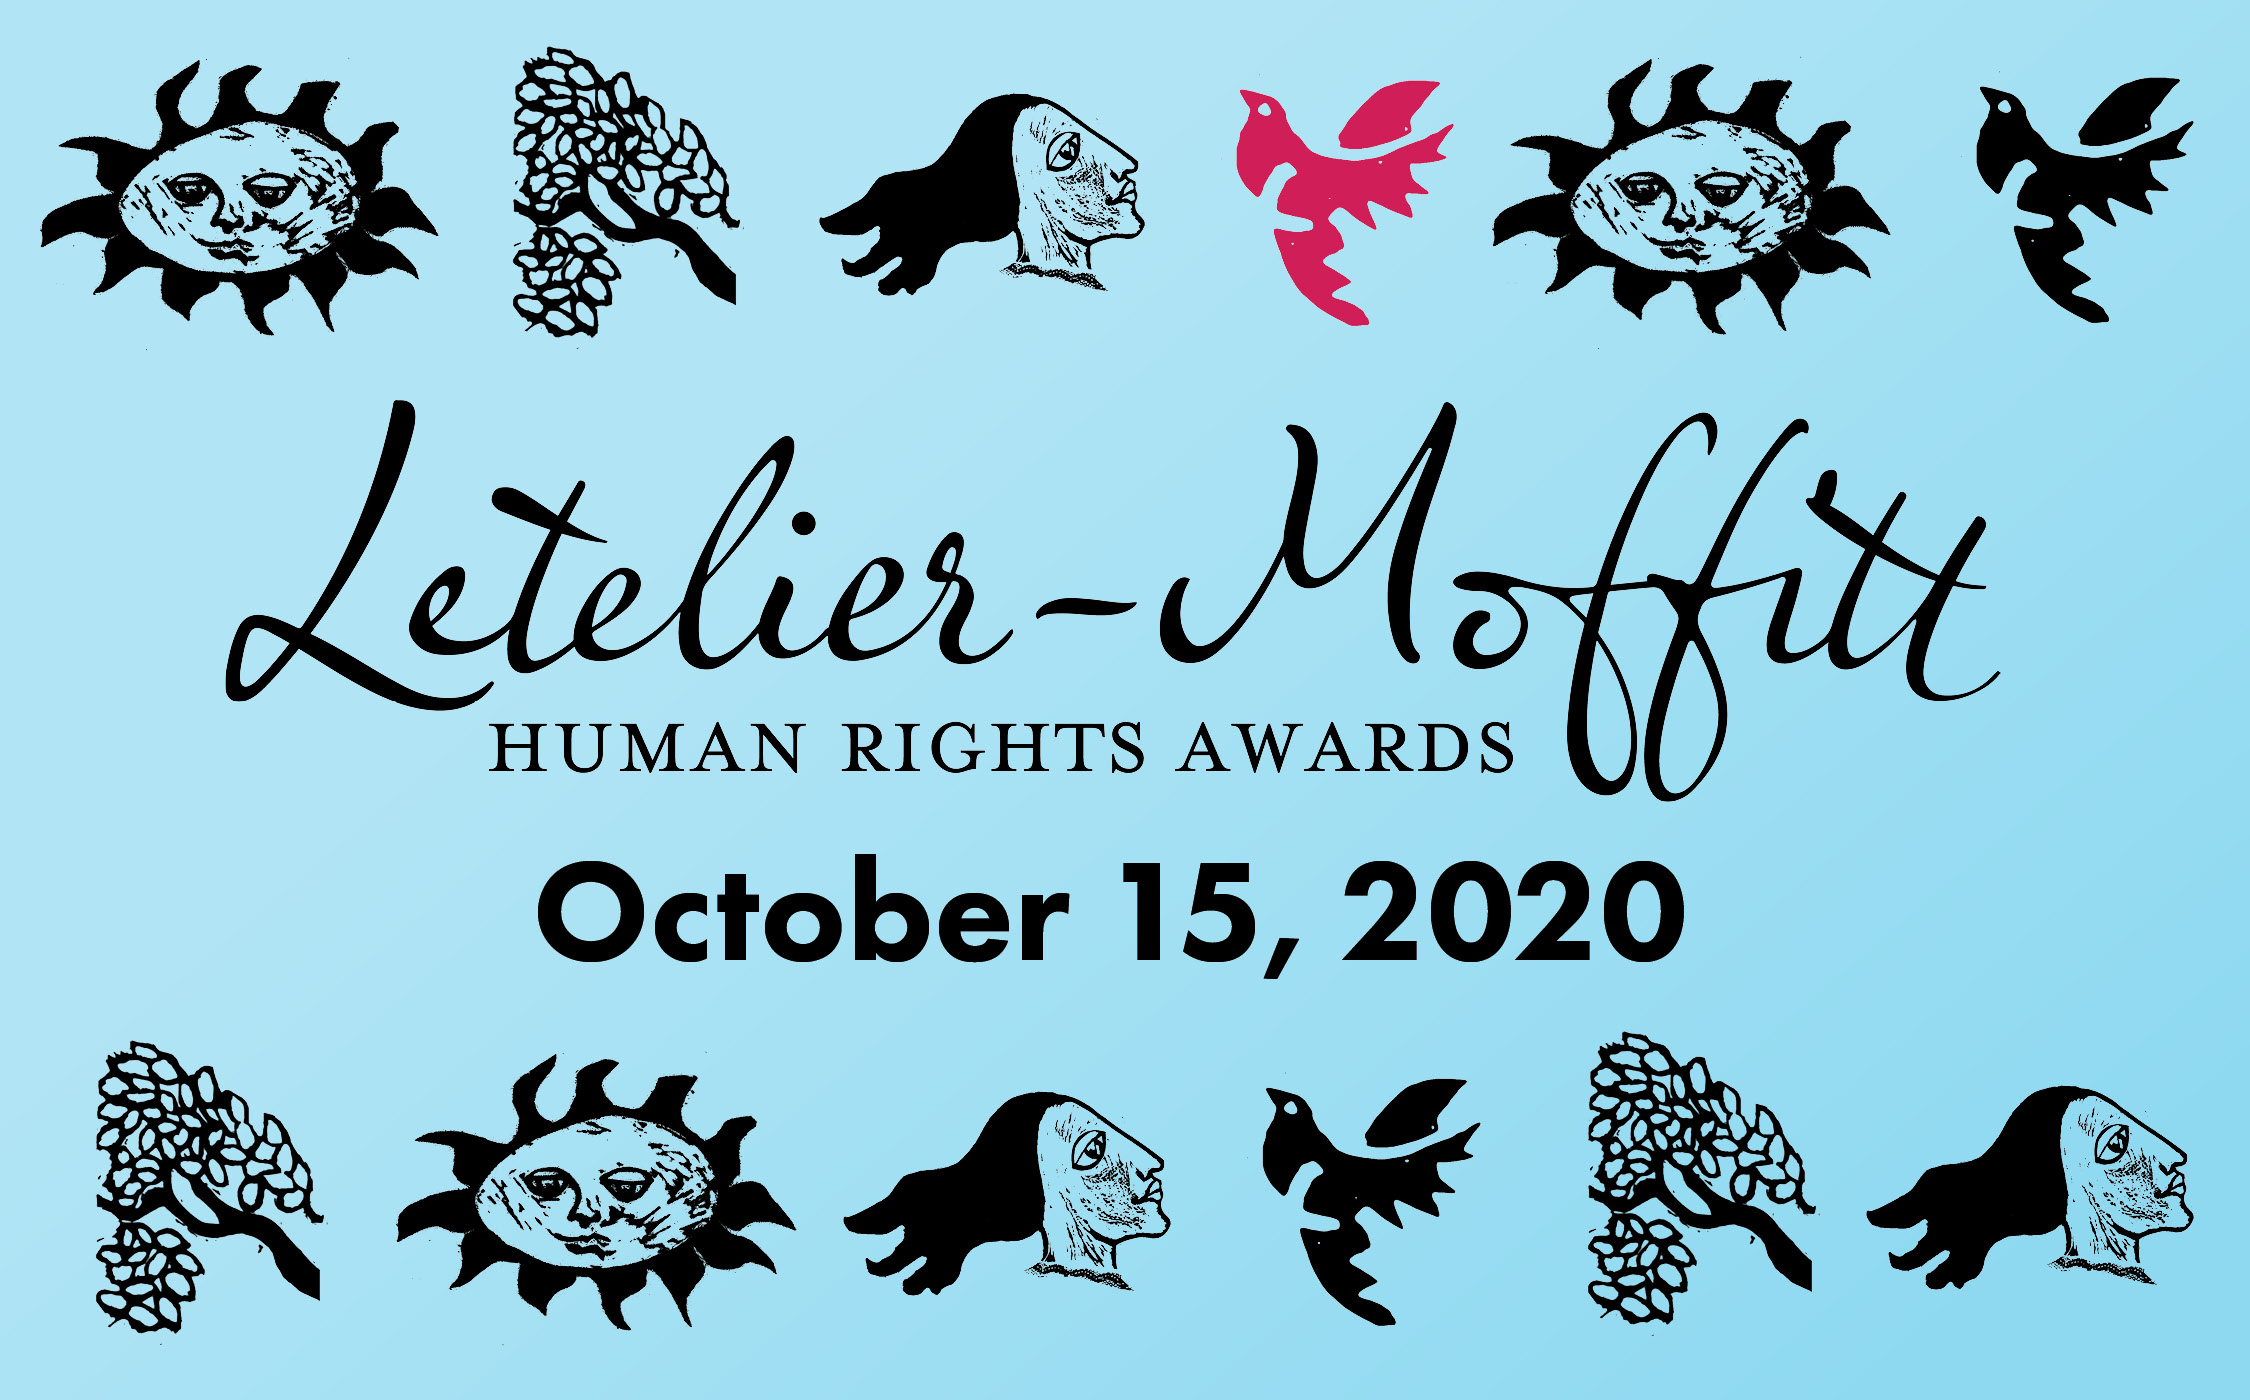 Join us for the 44th Annual Letelier-Moffitt Human Rights Awards